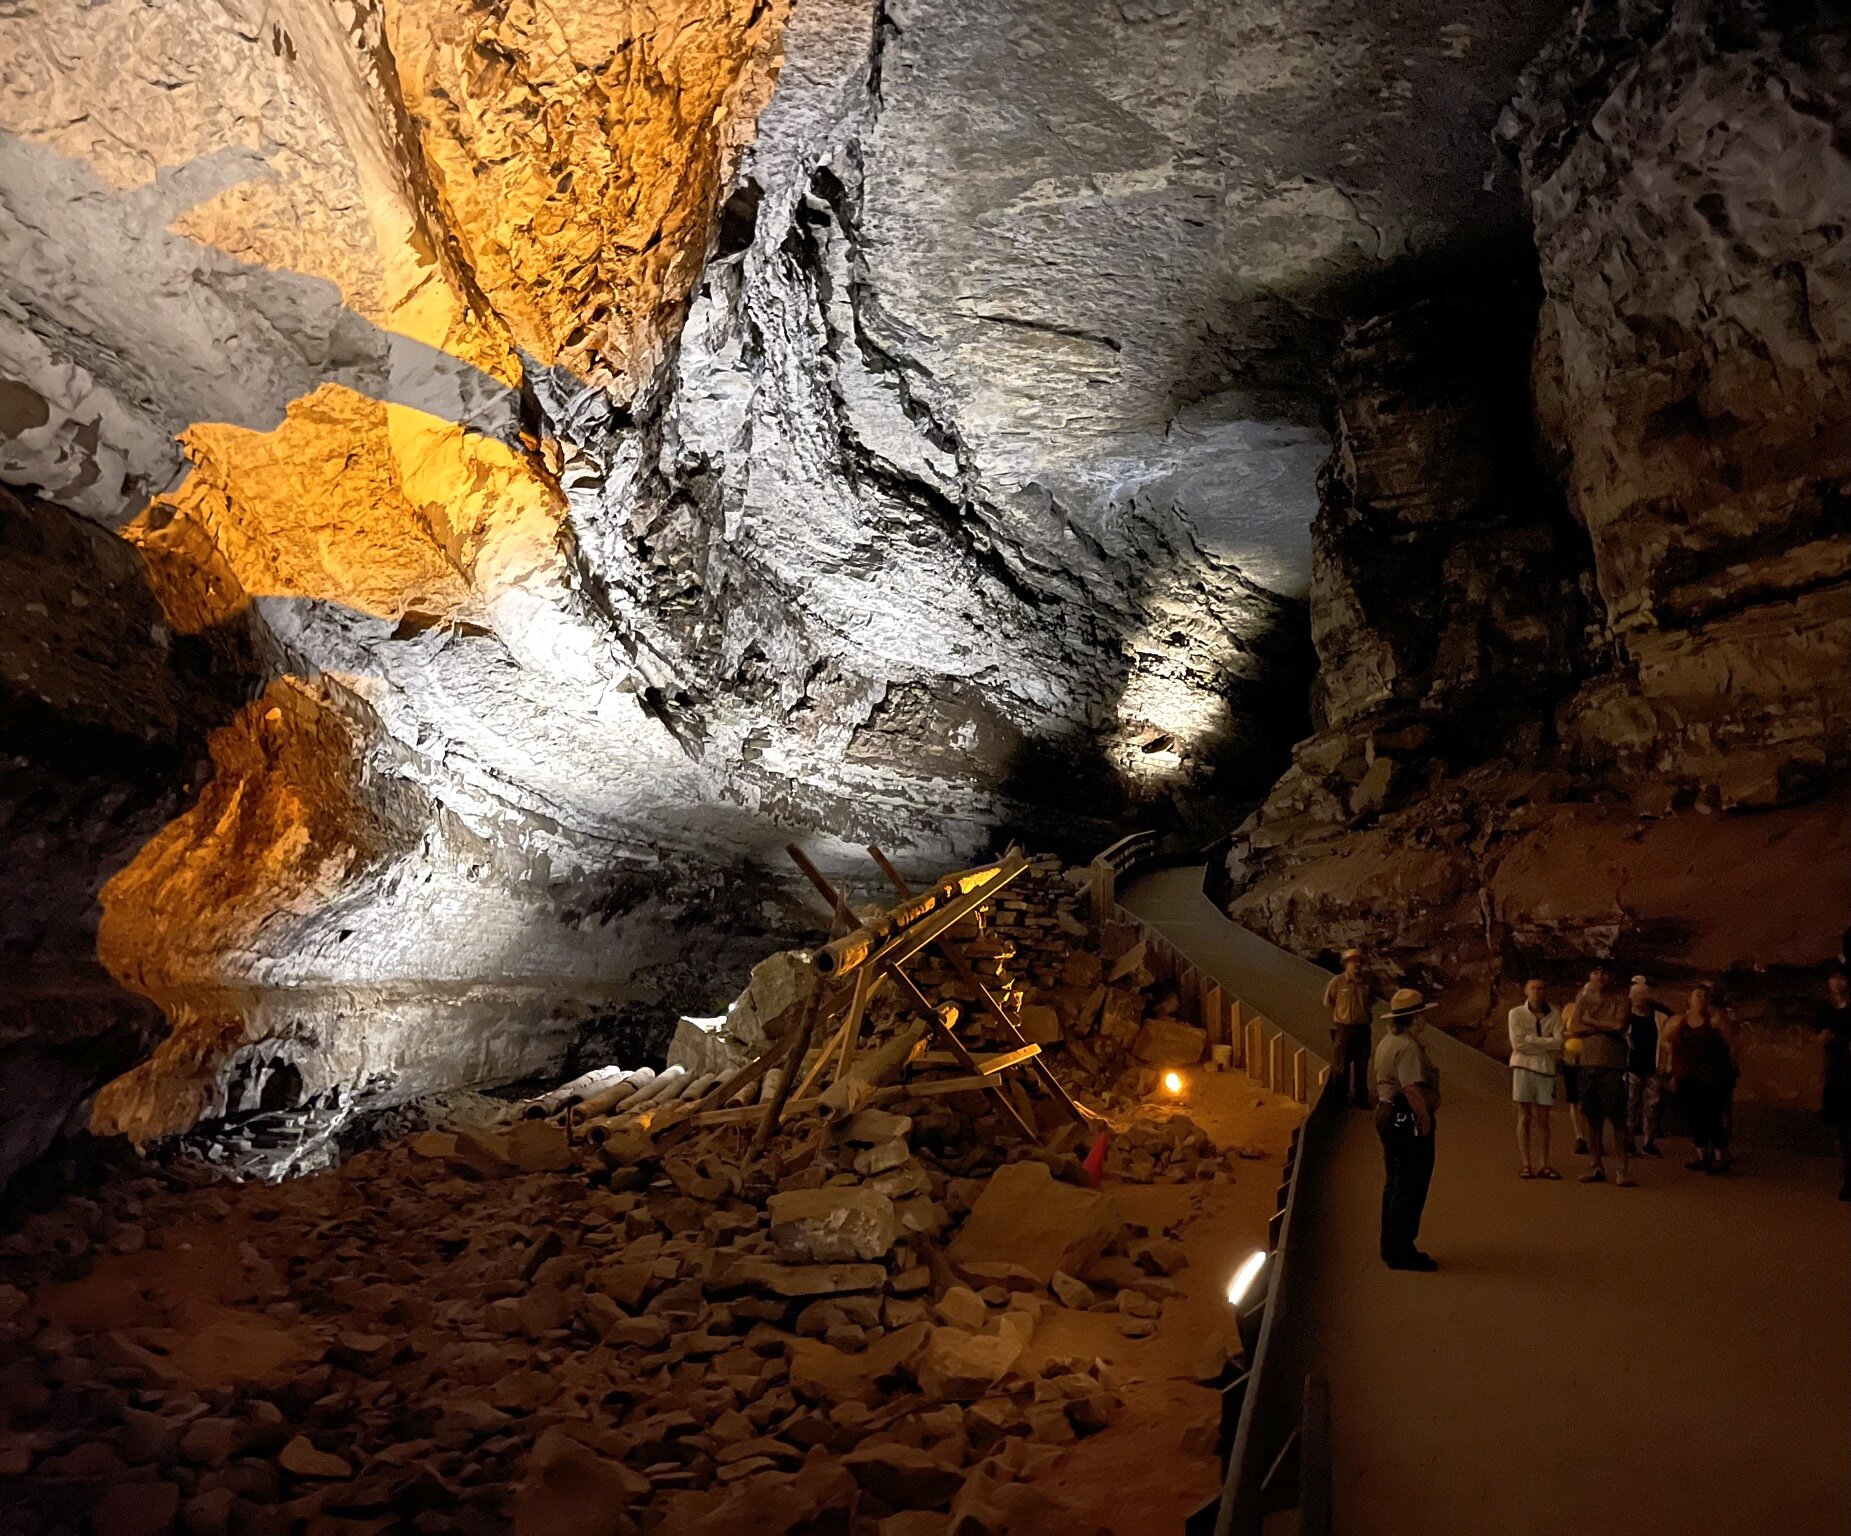   Some chambers in the cave system are enormous, with the tallest room reaching 192 feet tall.  